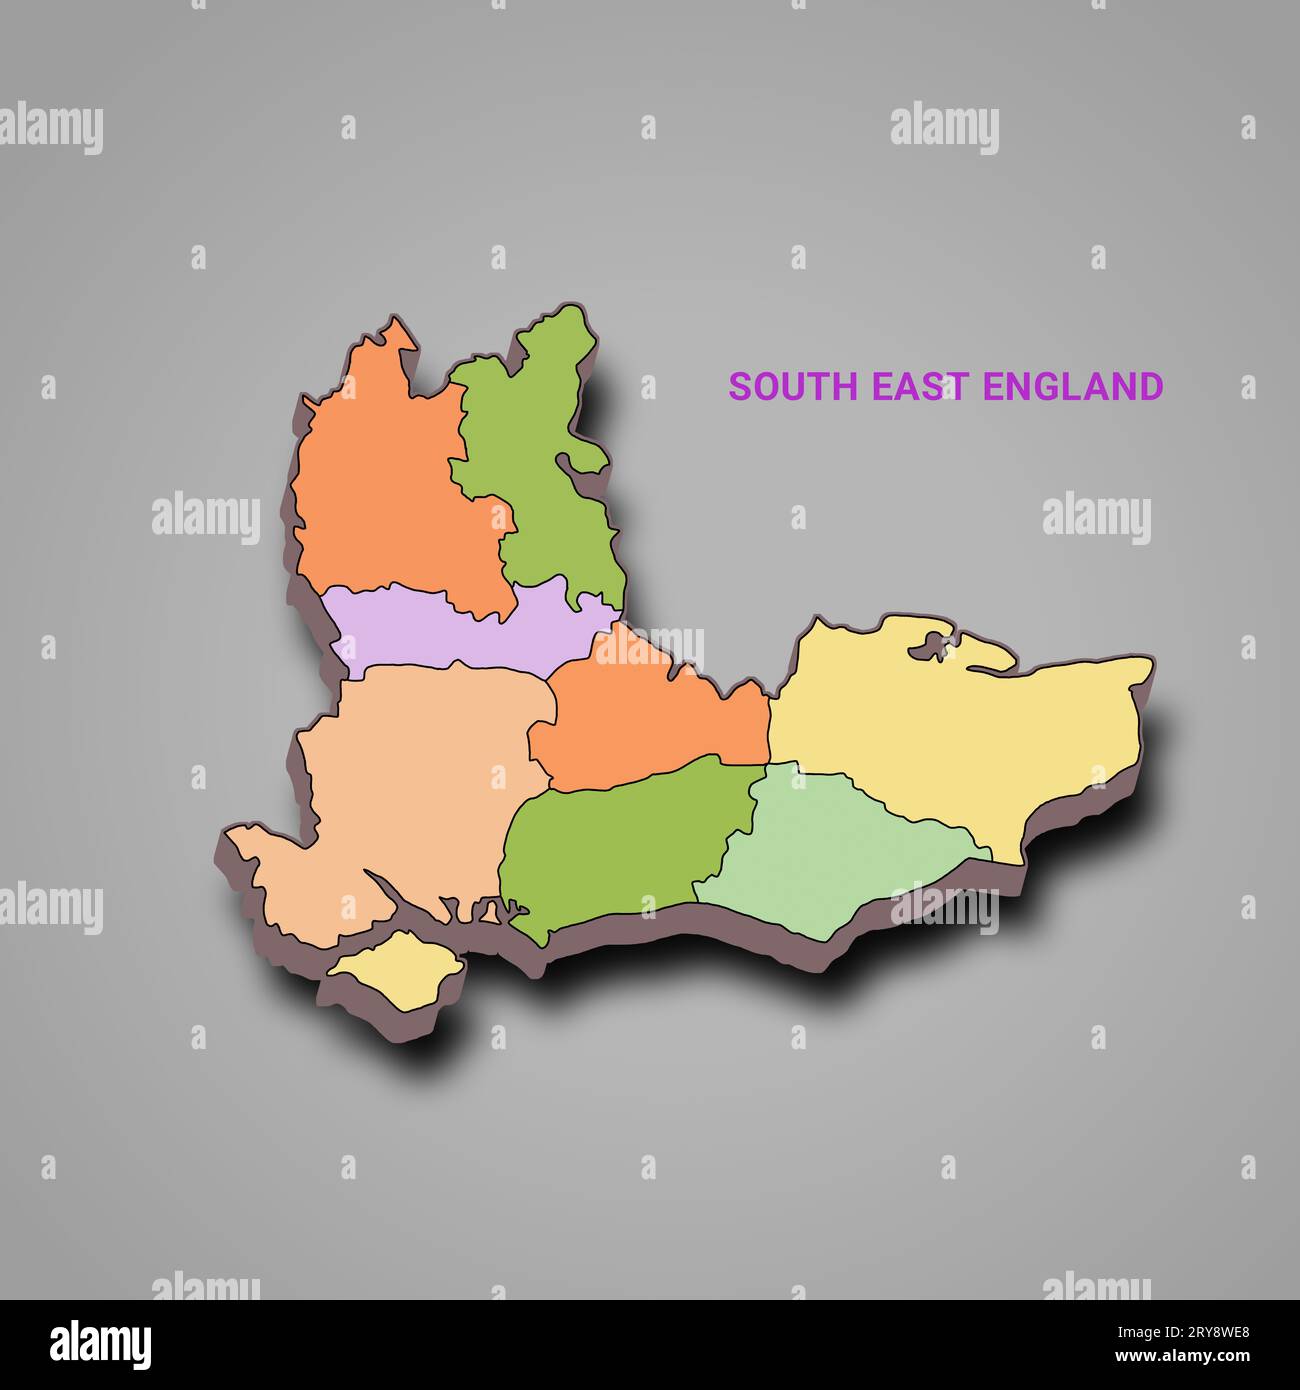 3d rendering High Quality outline map of South East England is a region of England, with borders of the ceremonial counties and different colour. Stock Photo